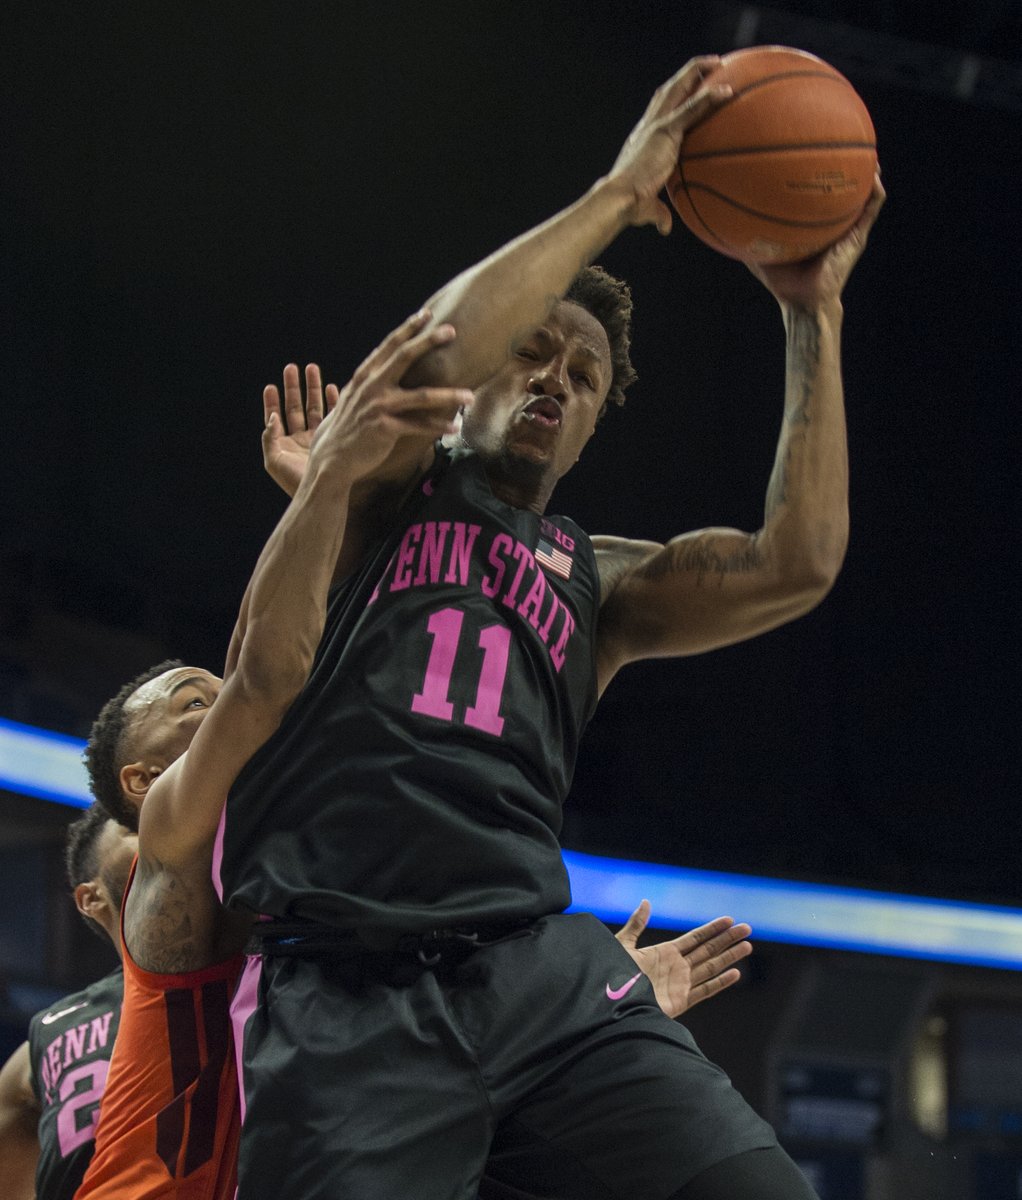 penn state black and pink basketball jersey